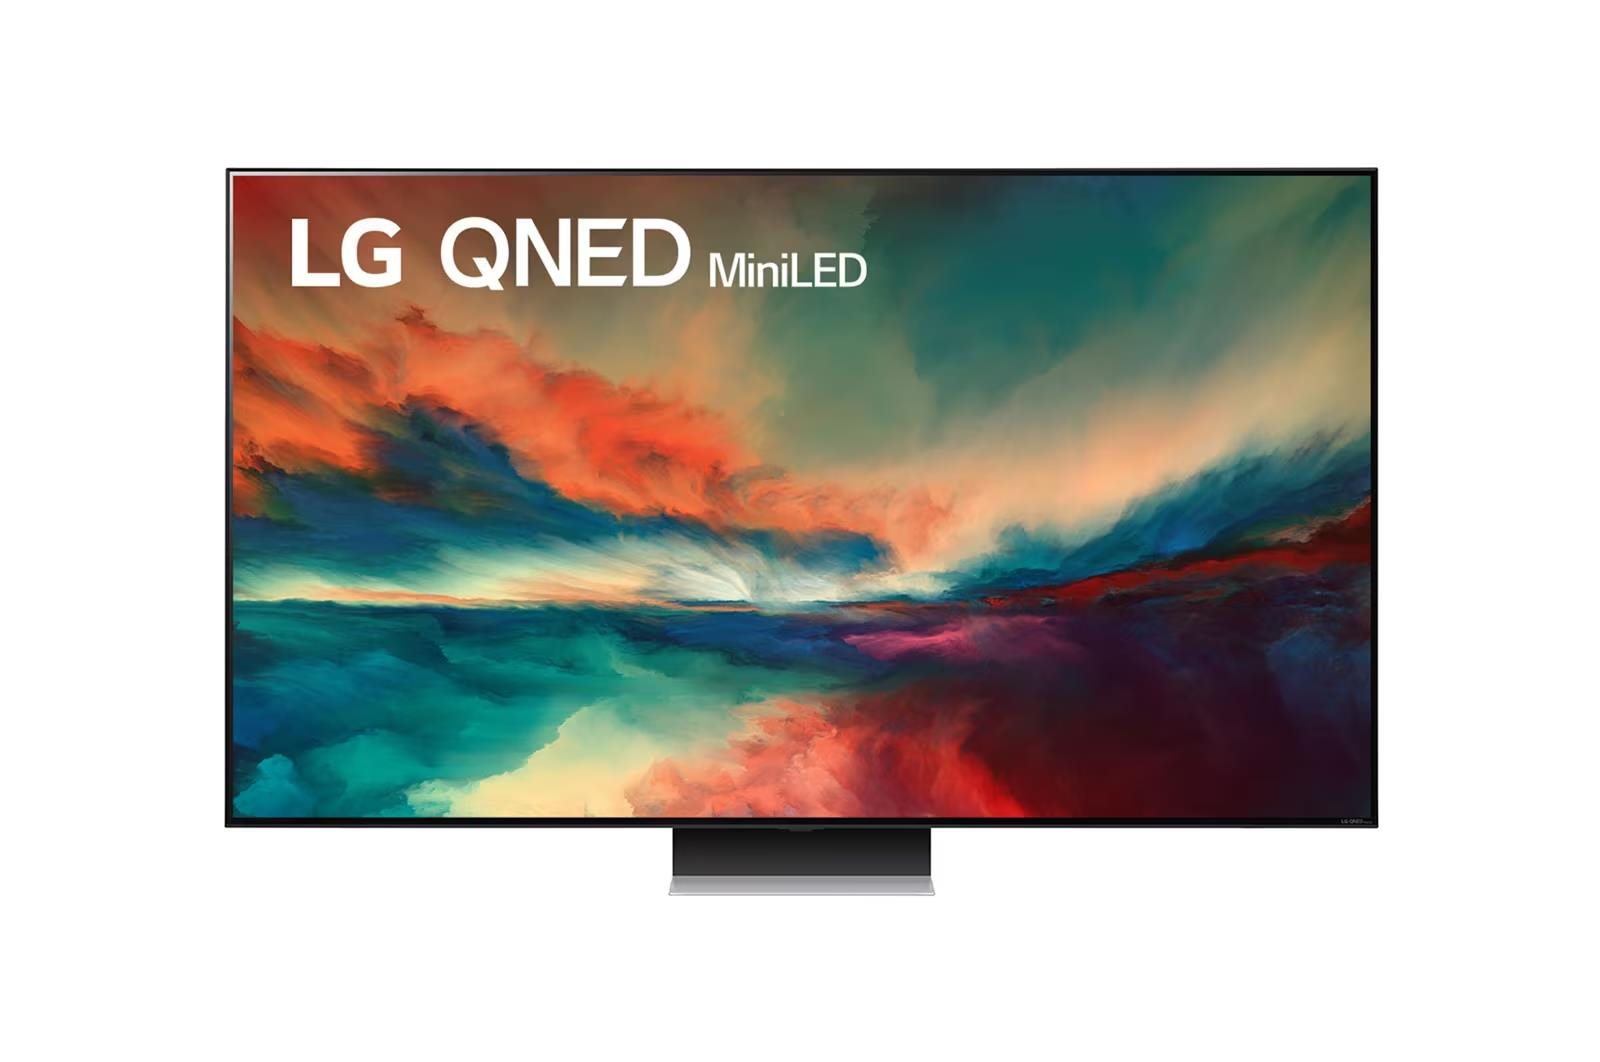 LG 75QNED863RE QNED TV 75"",  webOS Smart TV0 